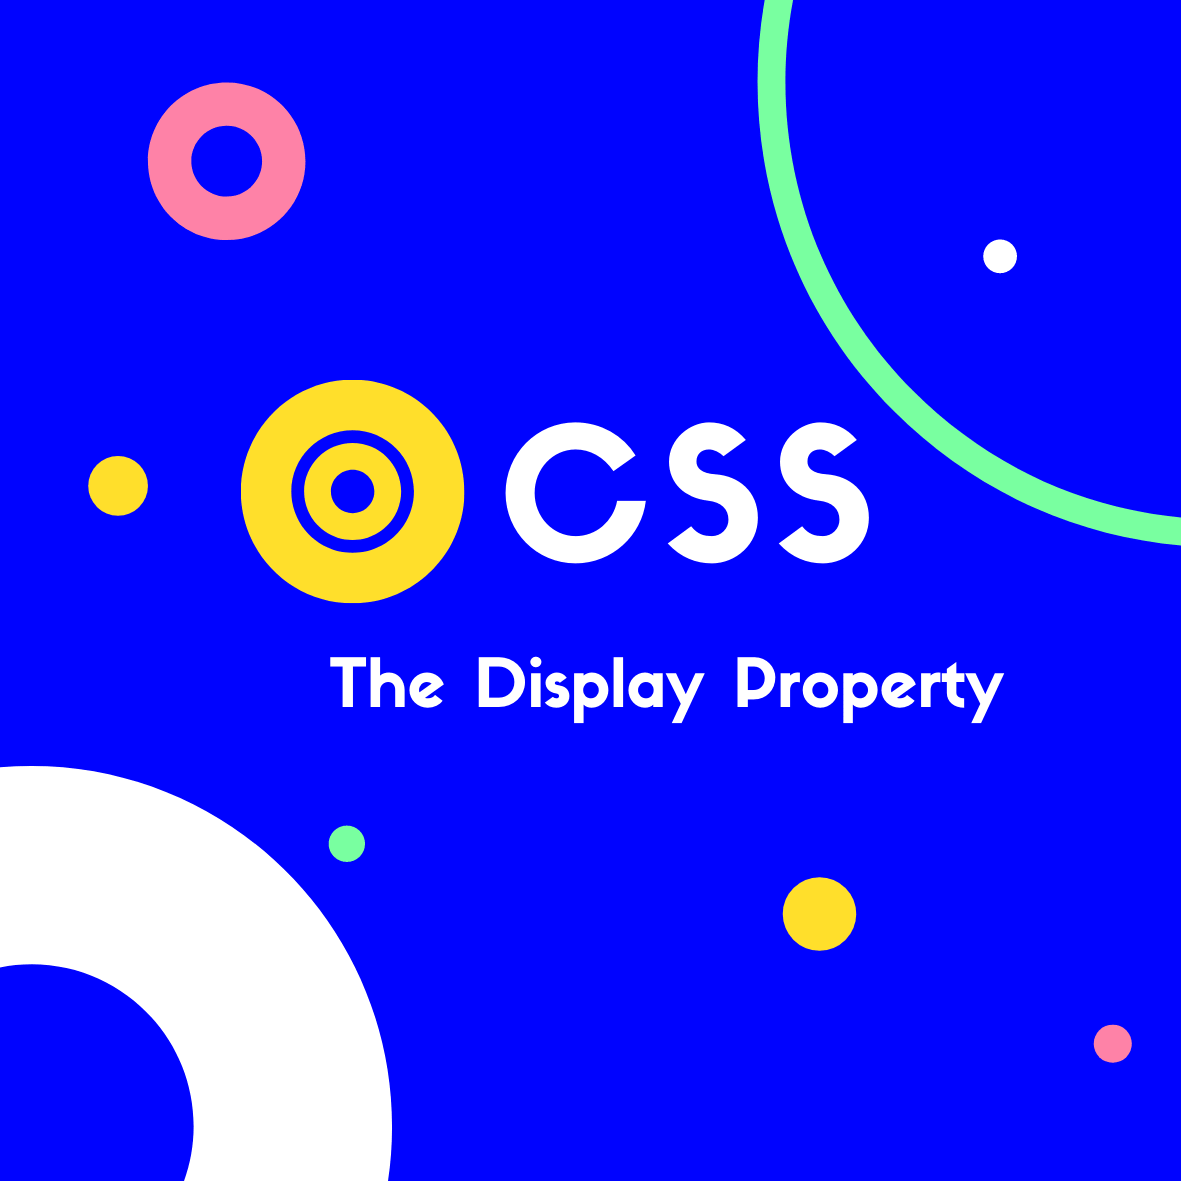 The Display Property